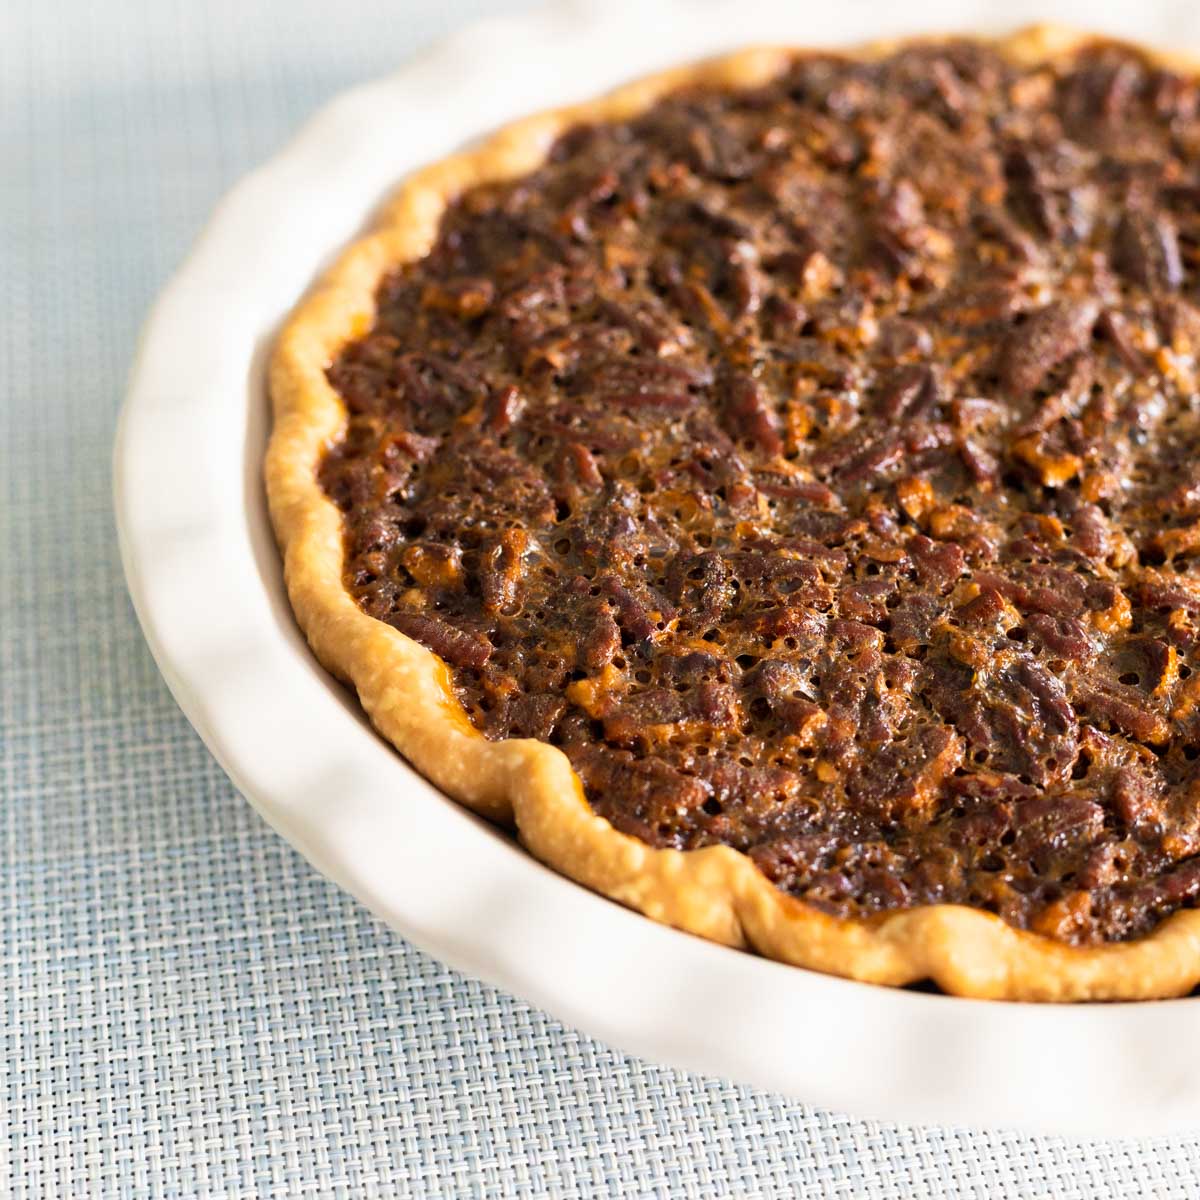 The homemade pecan pie is in a white pie dish on a blue background.